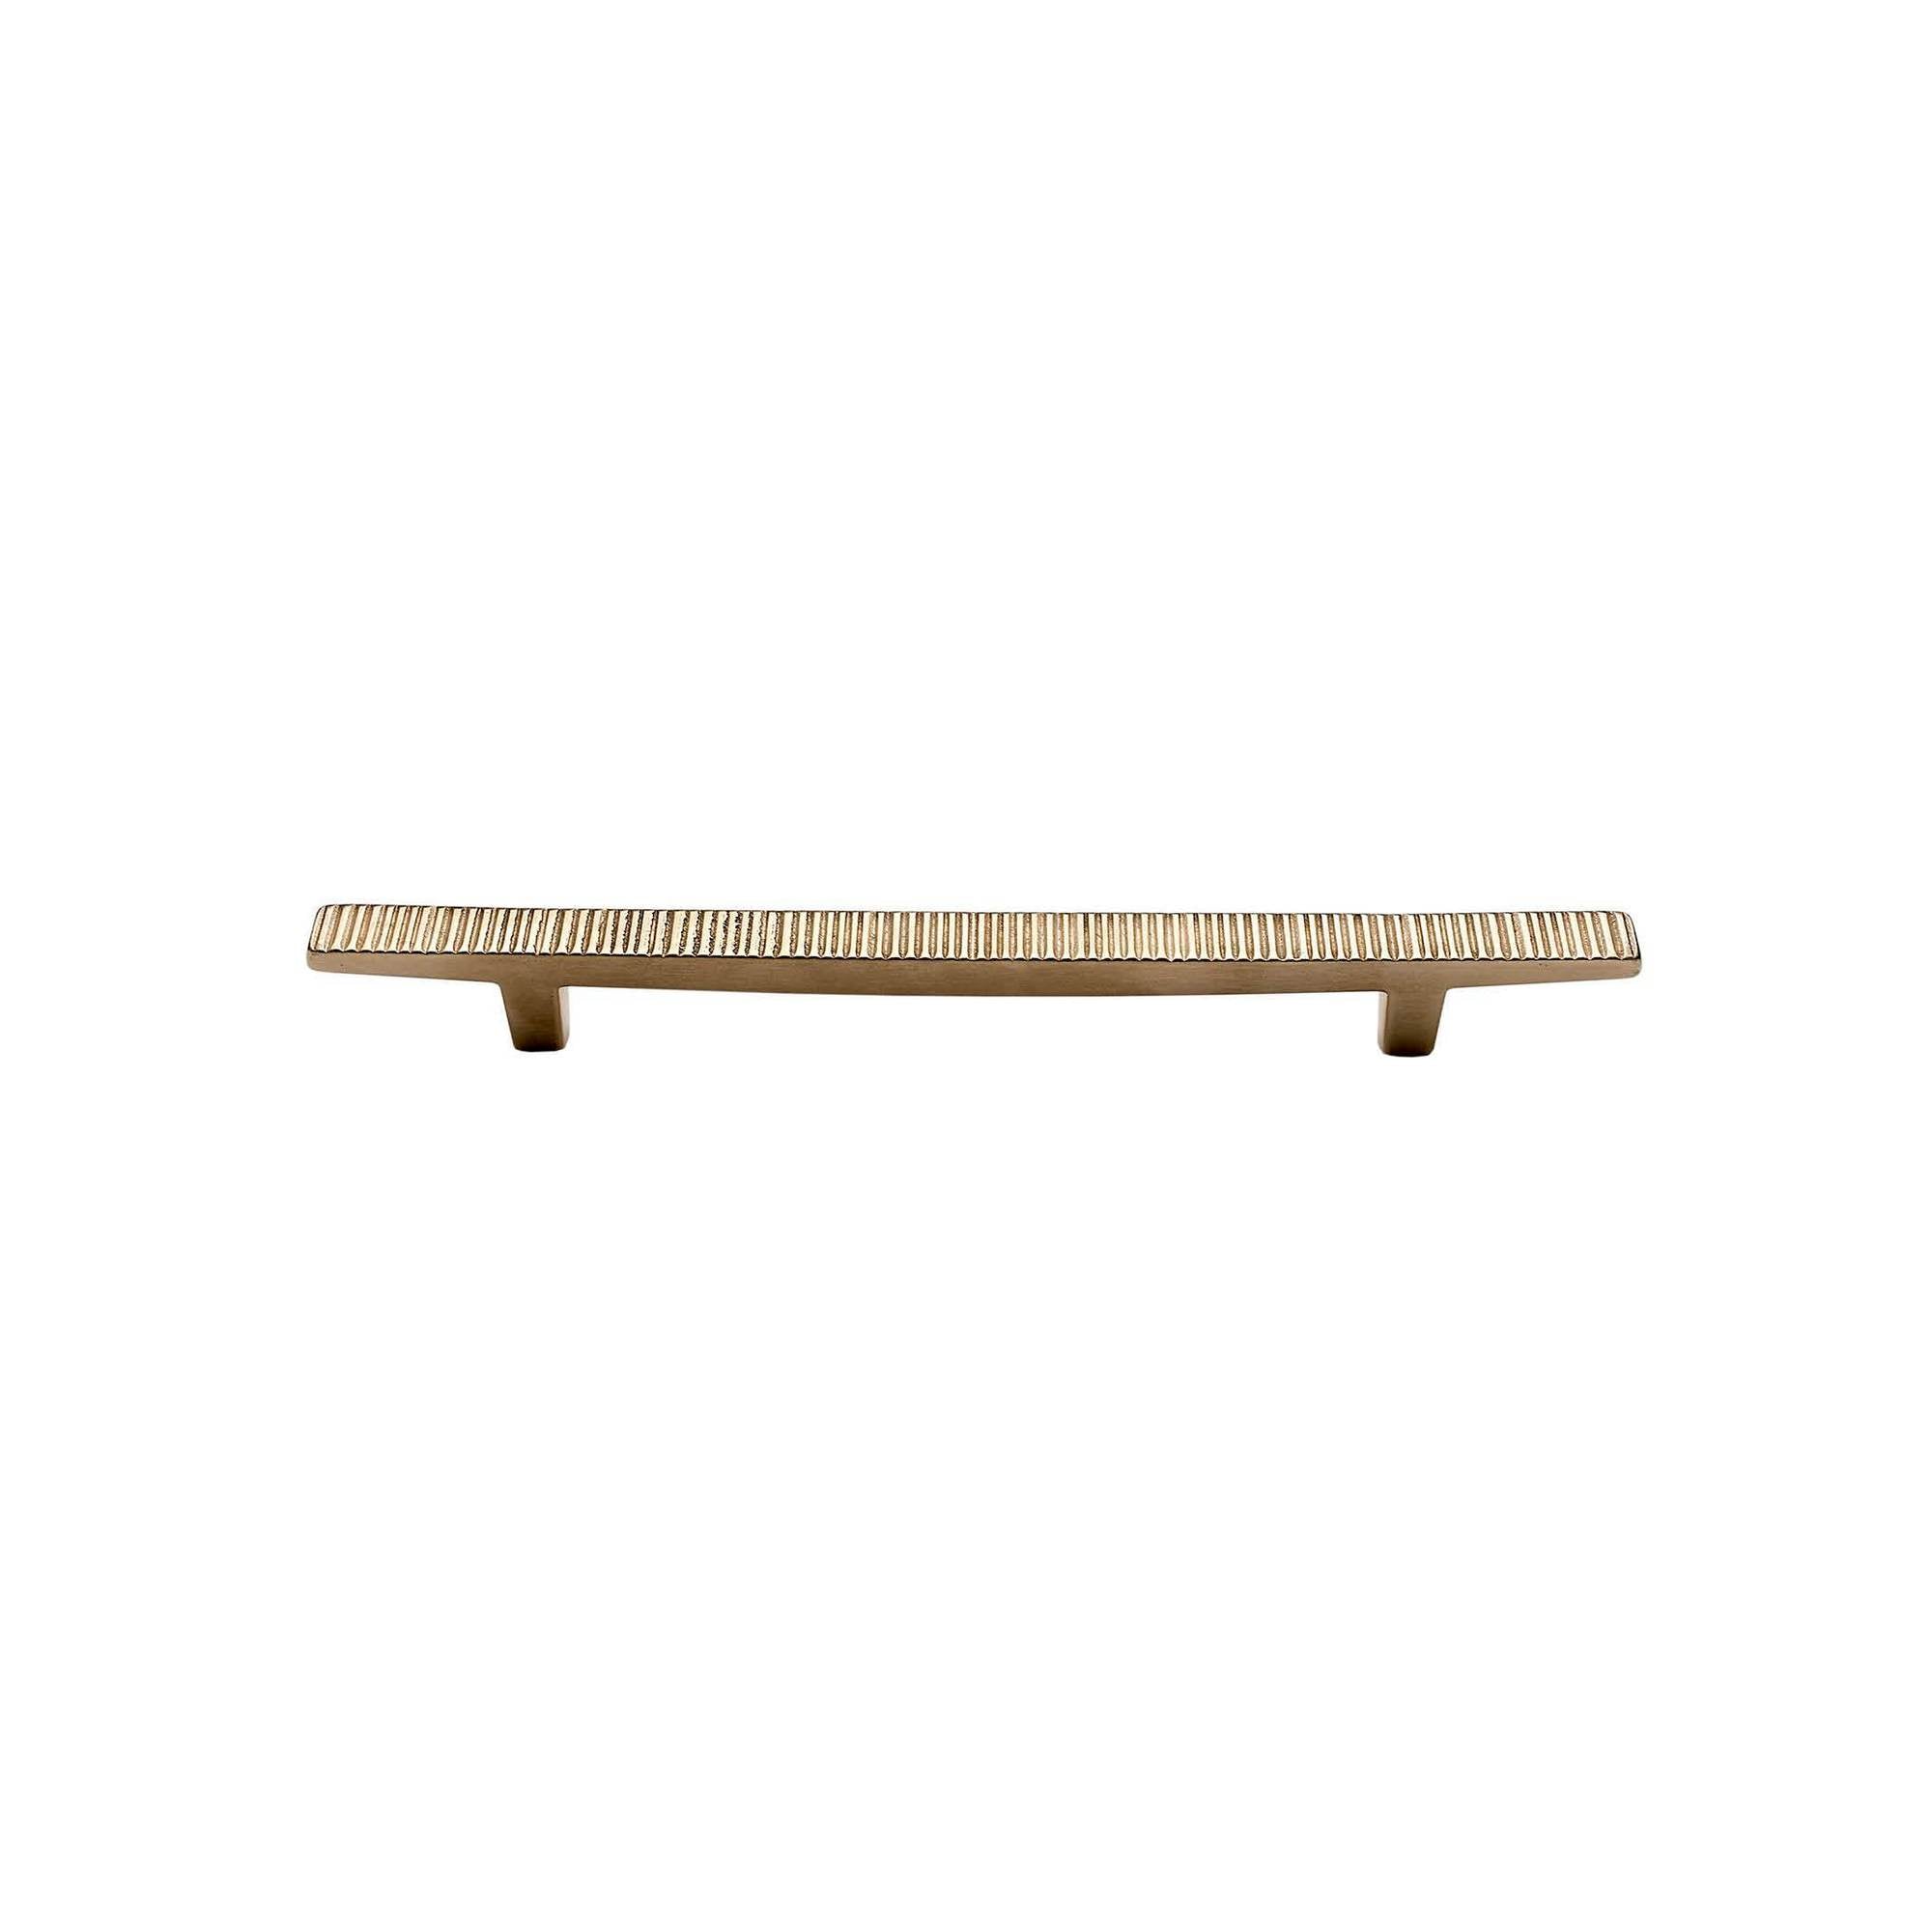 Rocky Mountain Hardware CK20044 - 8" C-to-C Brut Cabinet Pull